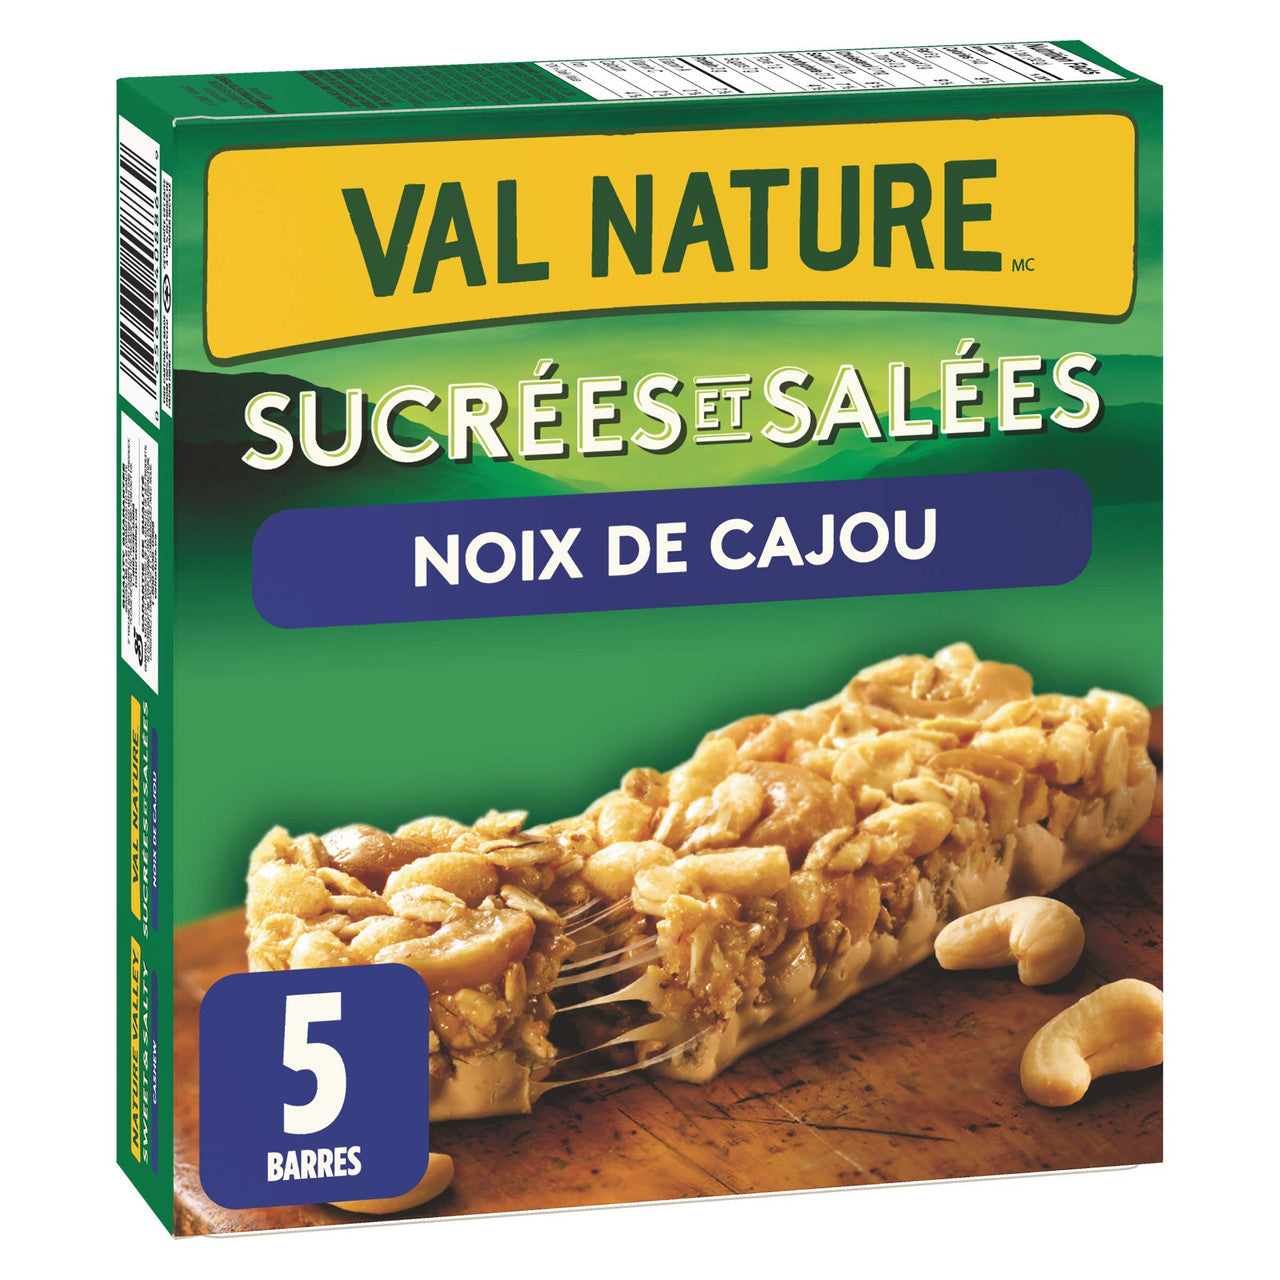 Nature Valley Sweet and Salty Cashew, 1pk , 160g/5.64oz  {Canadian}